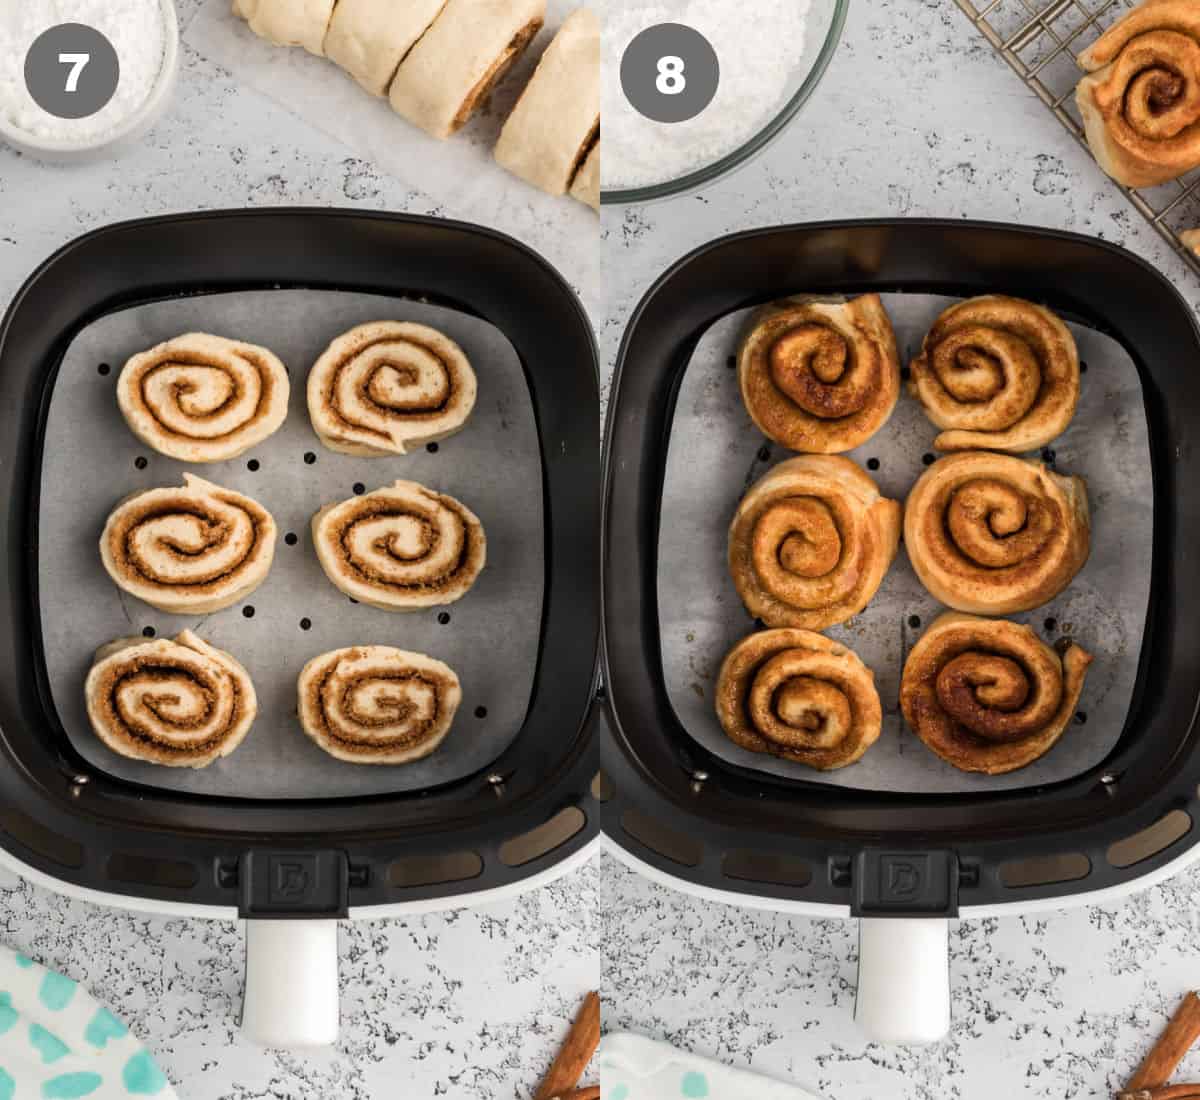 Sliced cinnamon rolls placed into the fryer.